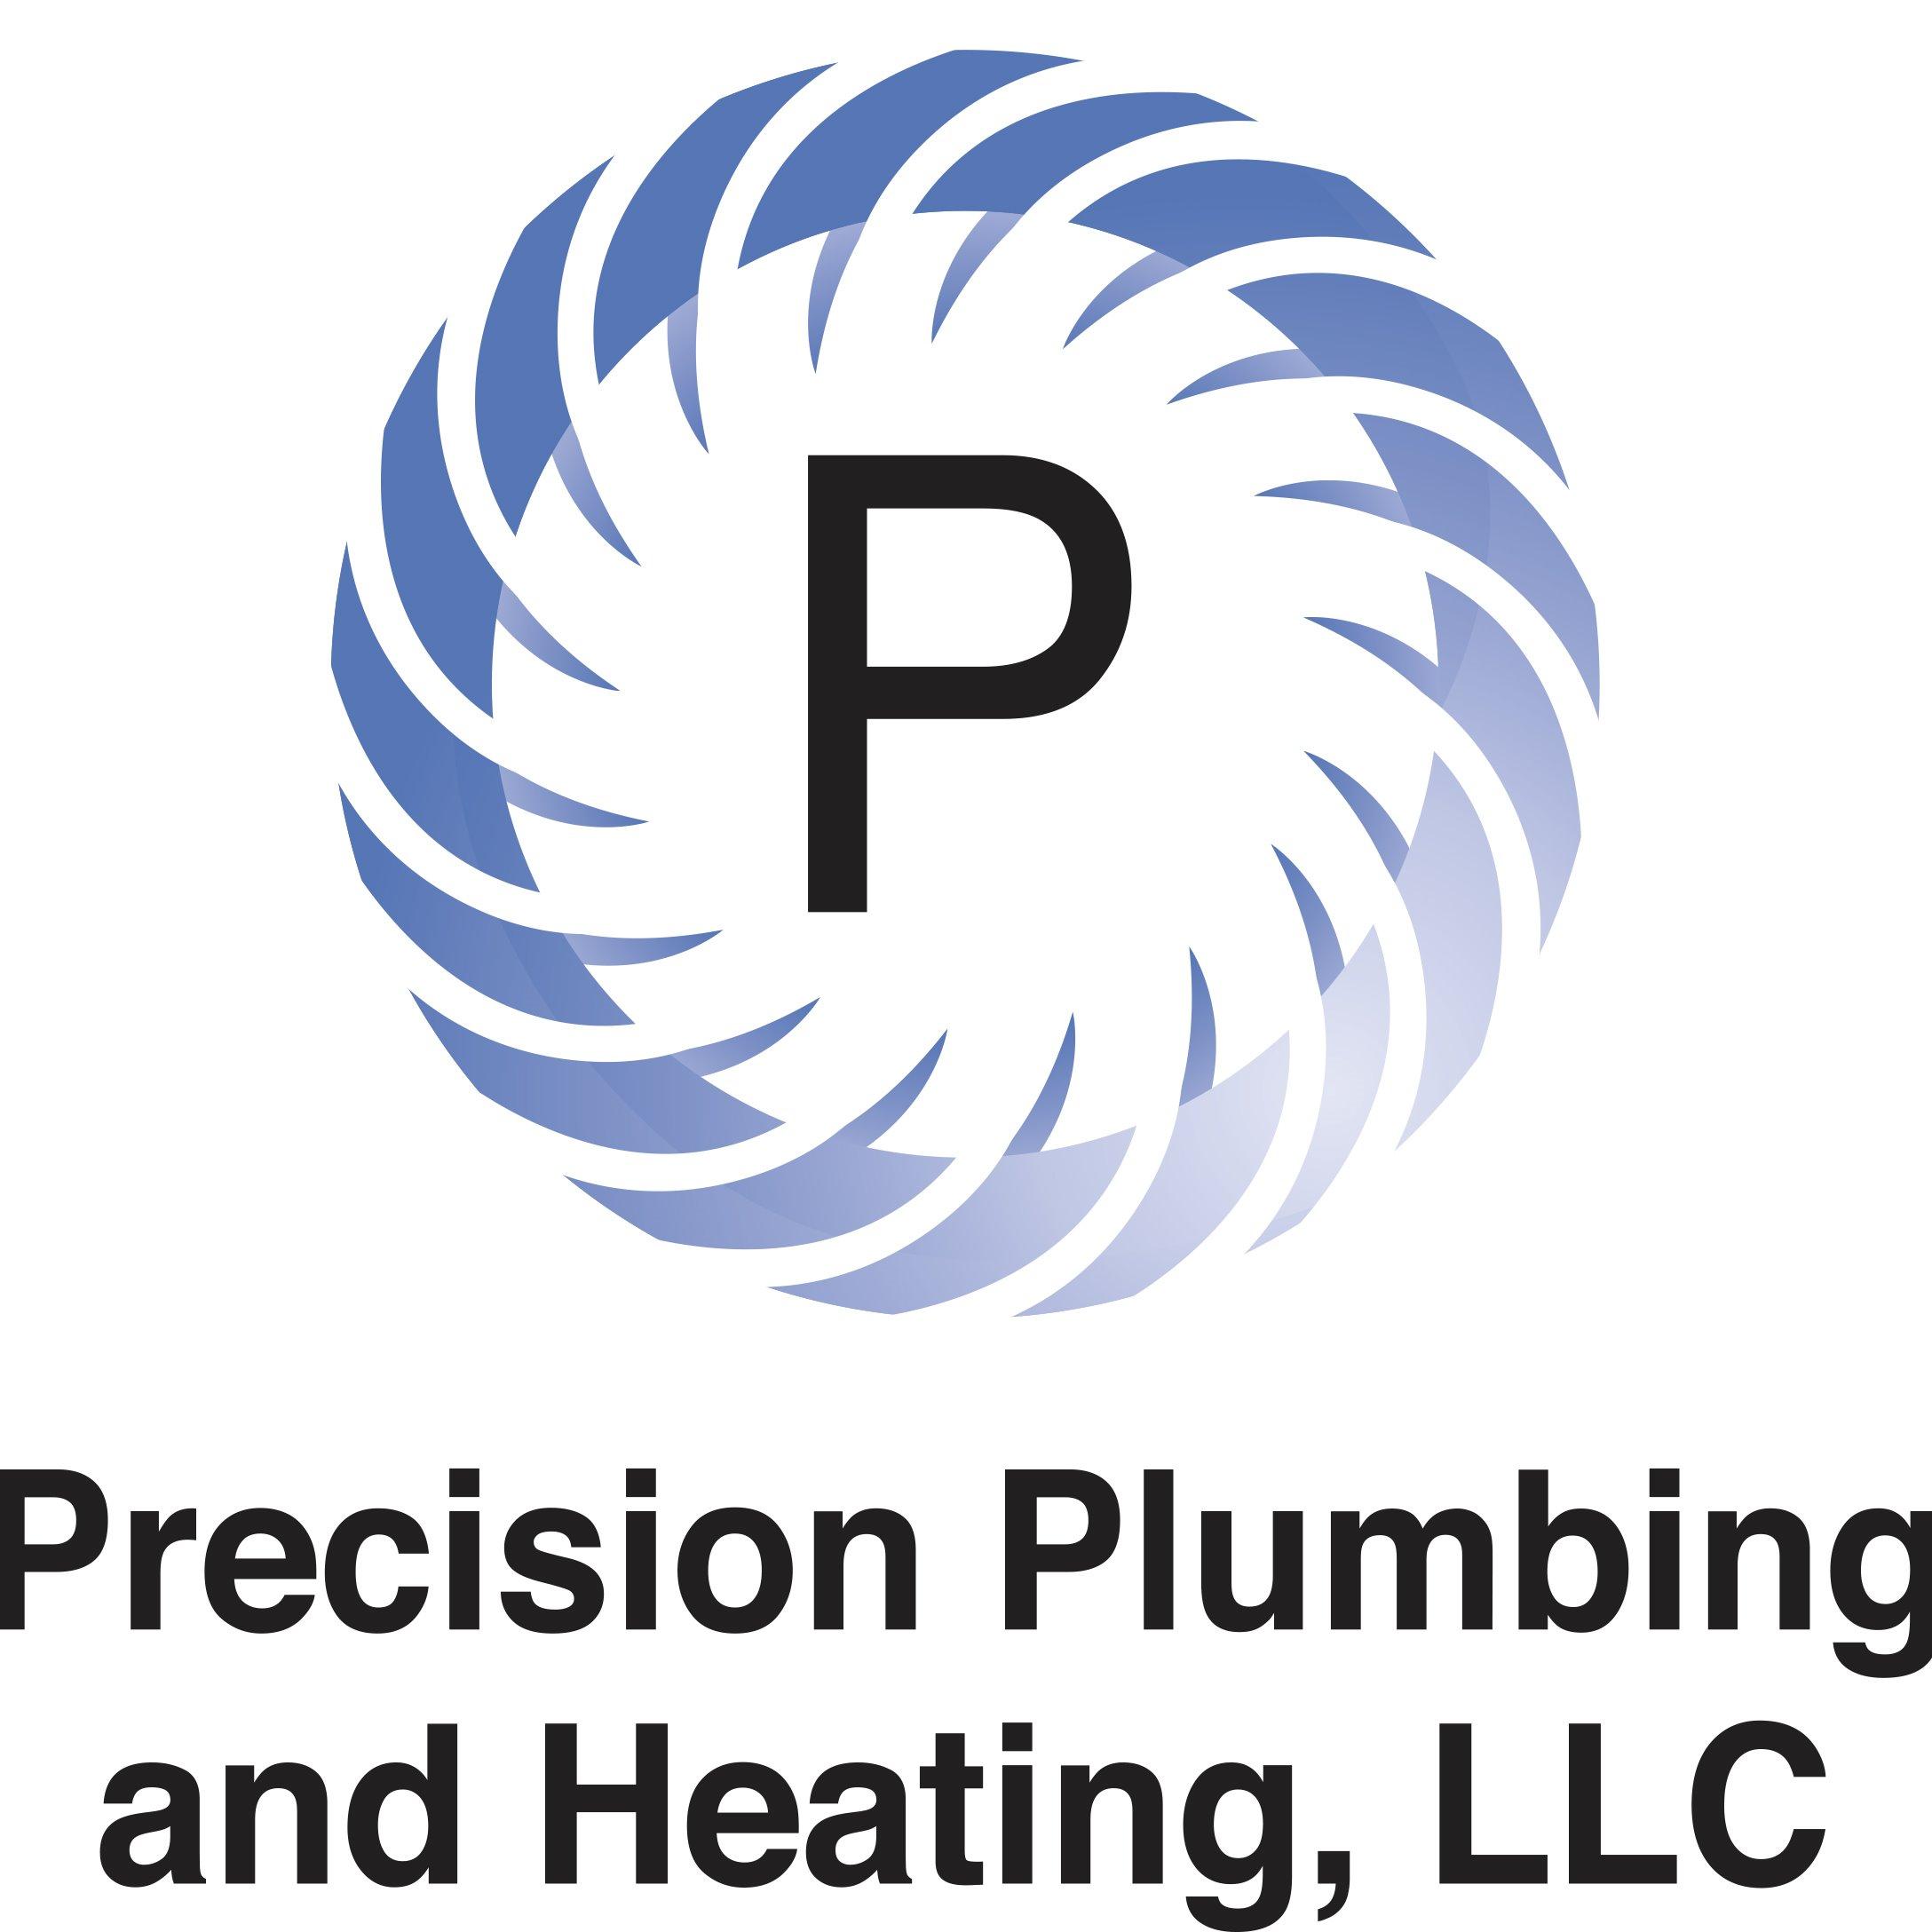 Precision and Plumbing and Heating Logo